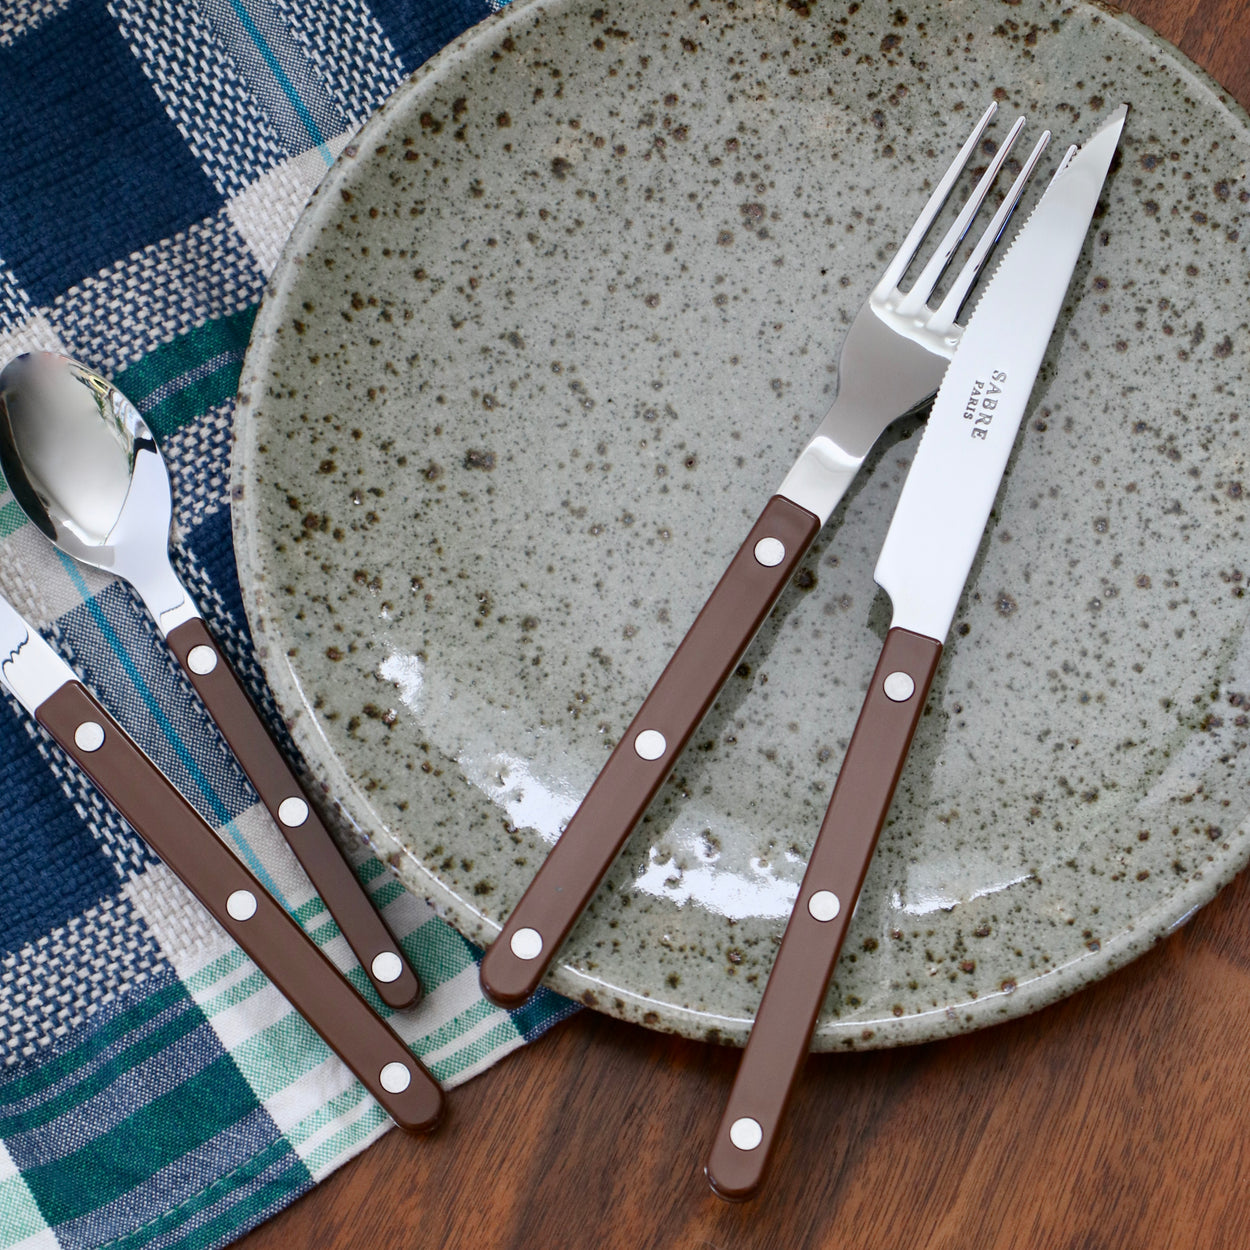 Sabre Paris Bistrot Chocolate Brown Cutlery 4 Piece Set on ceramic plate with blue napkin and wood table.